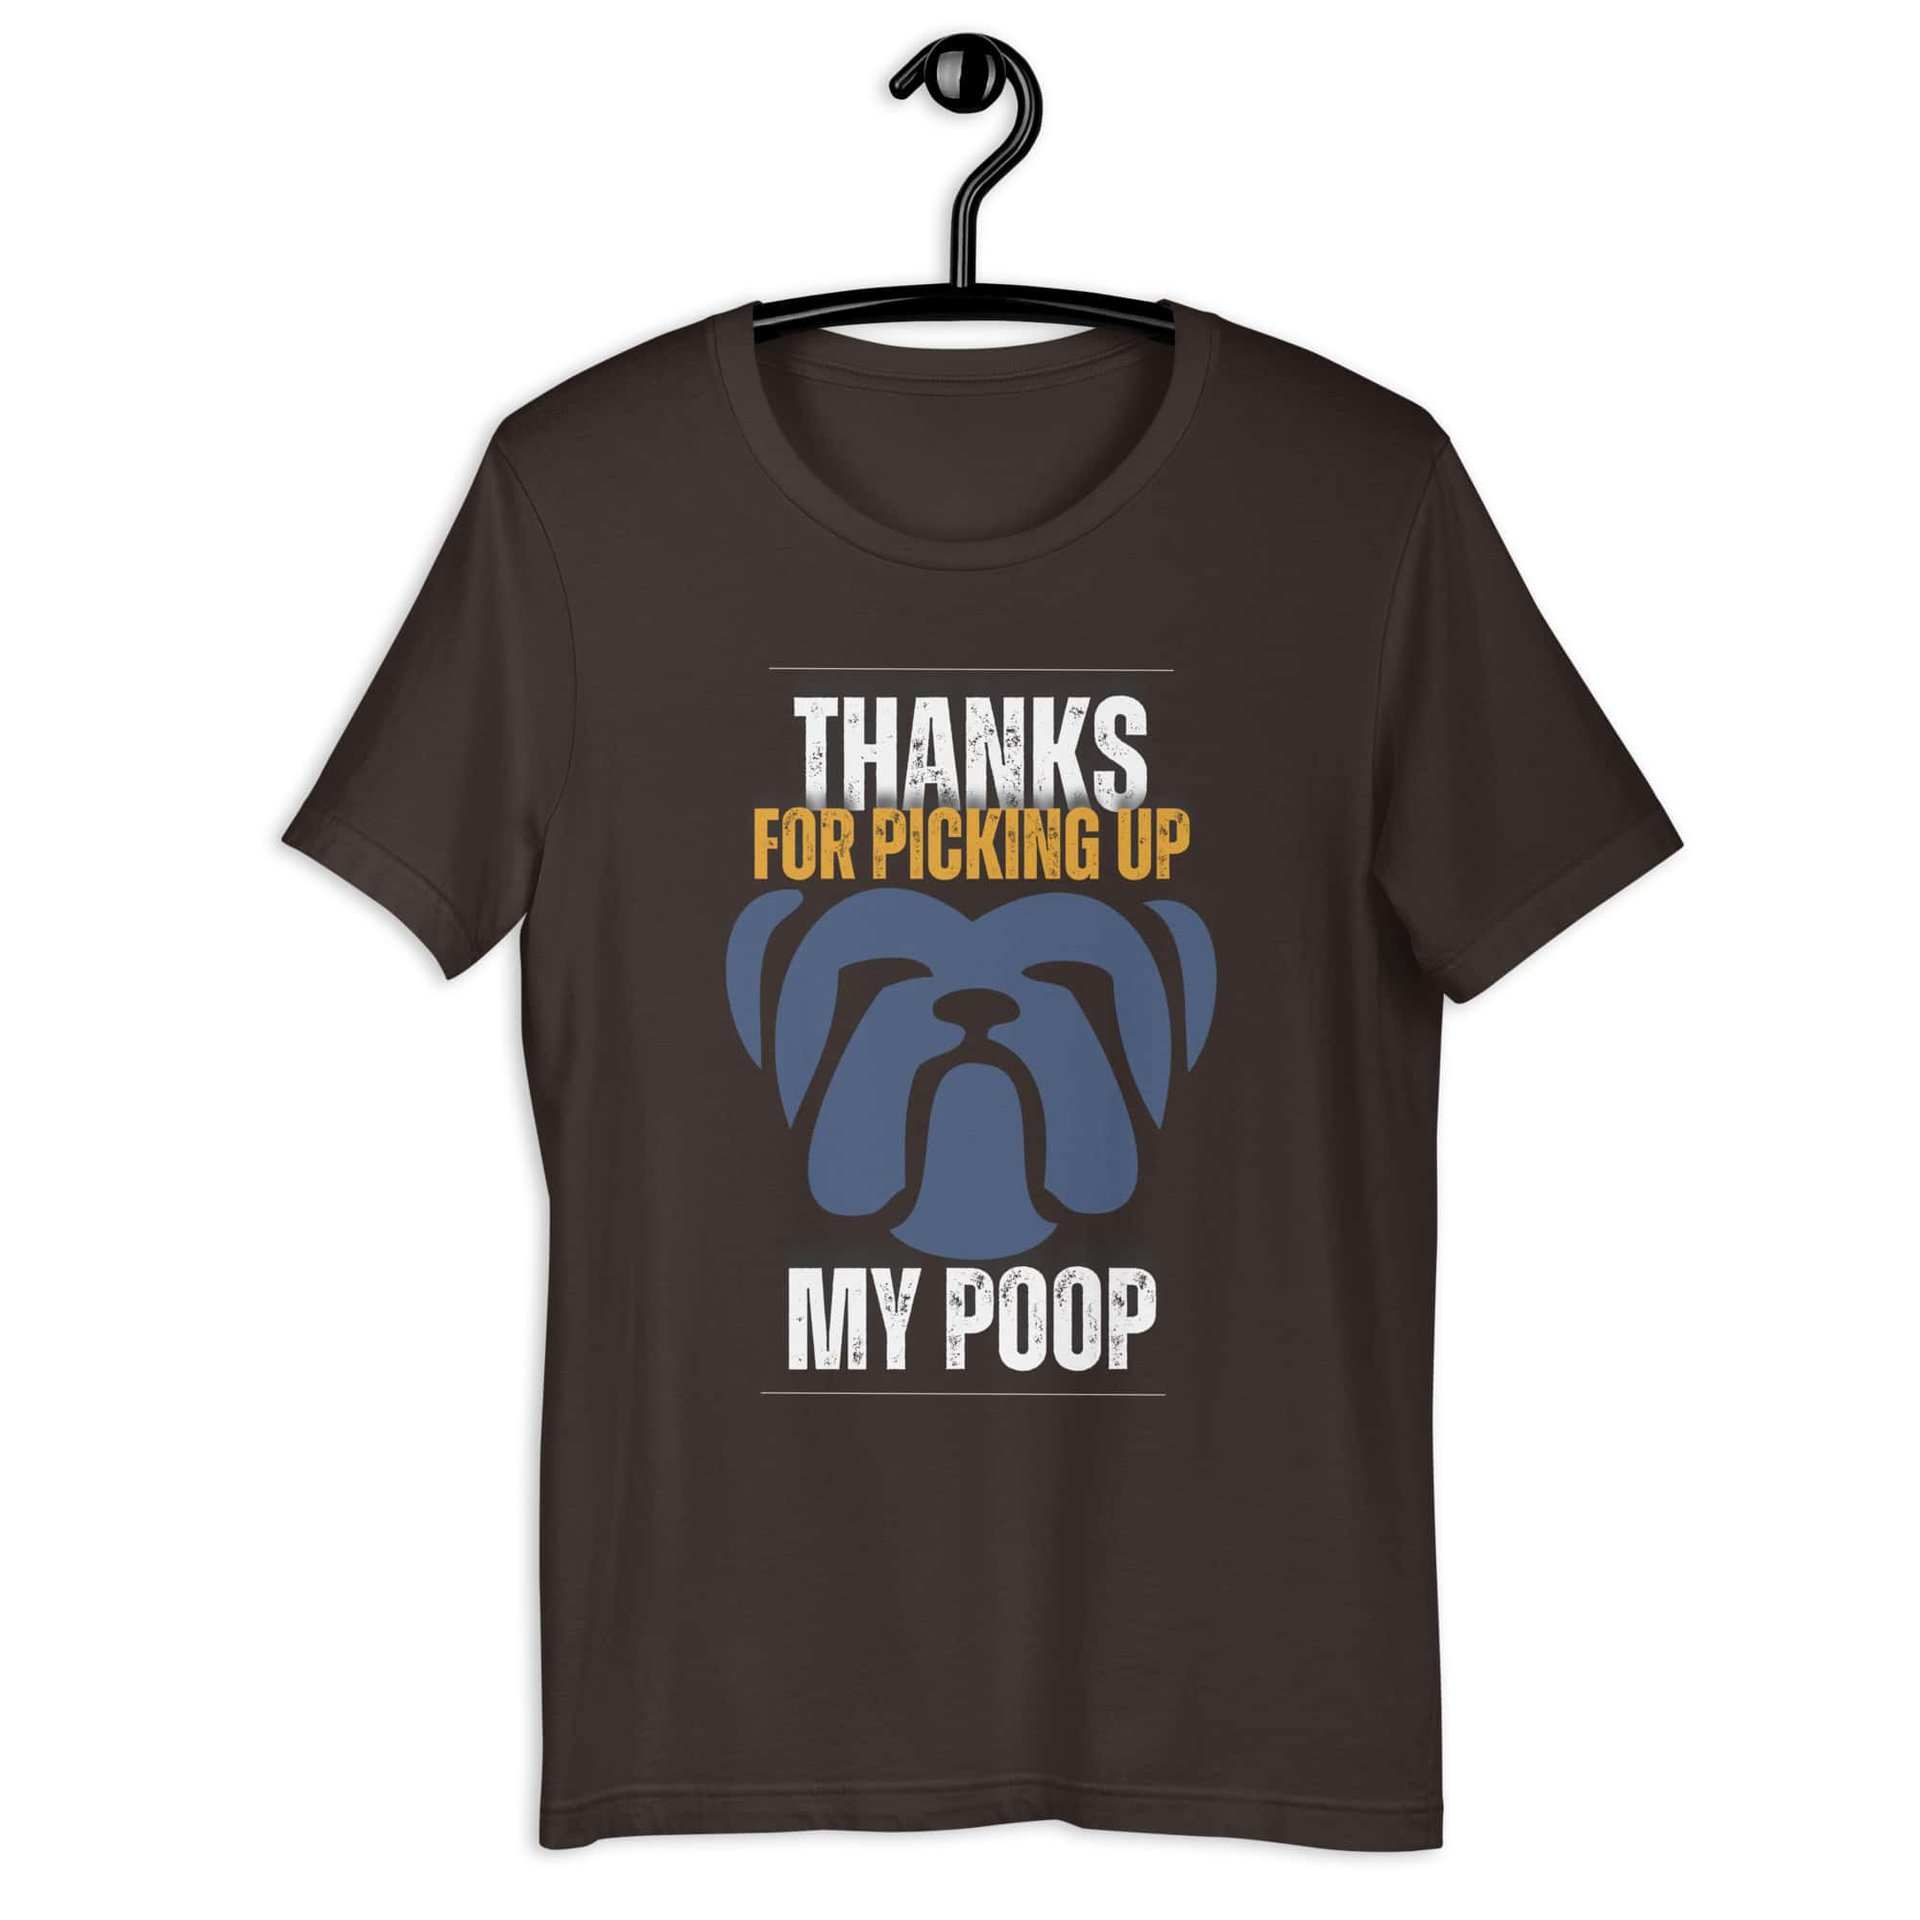 Thanks For Picking Up My POOP Funny Bulldog Unisex T-Shirt. Brown